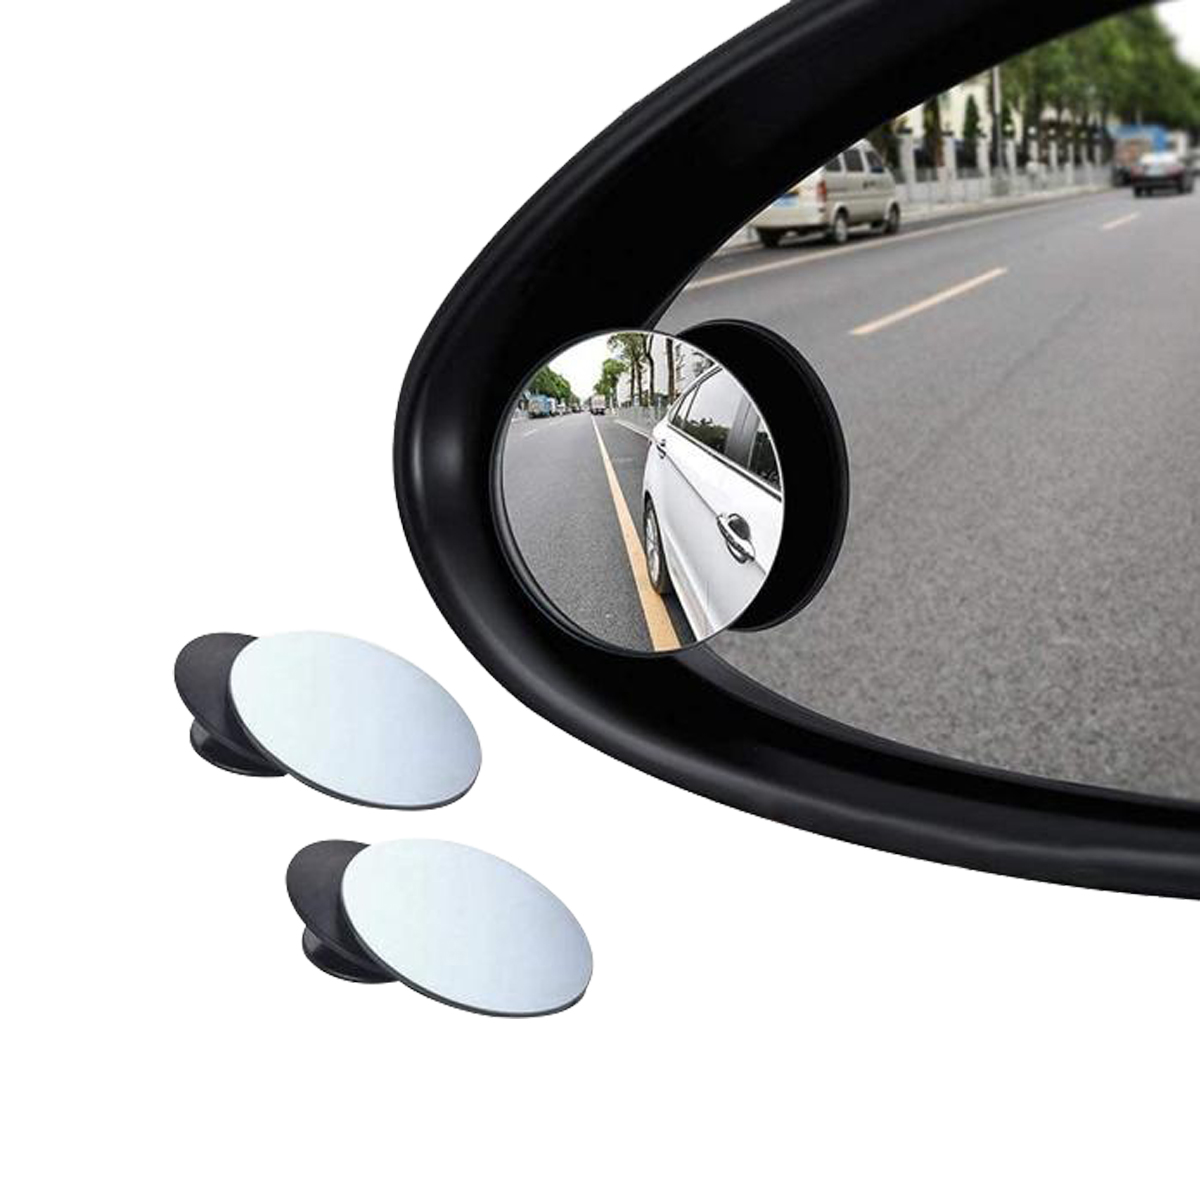 christmas-gift-ideas-for-car-and-diy-lover/images/Blind-Spot-Mirror-partsavatar-canada.jpeg